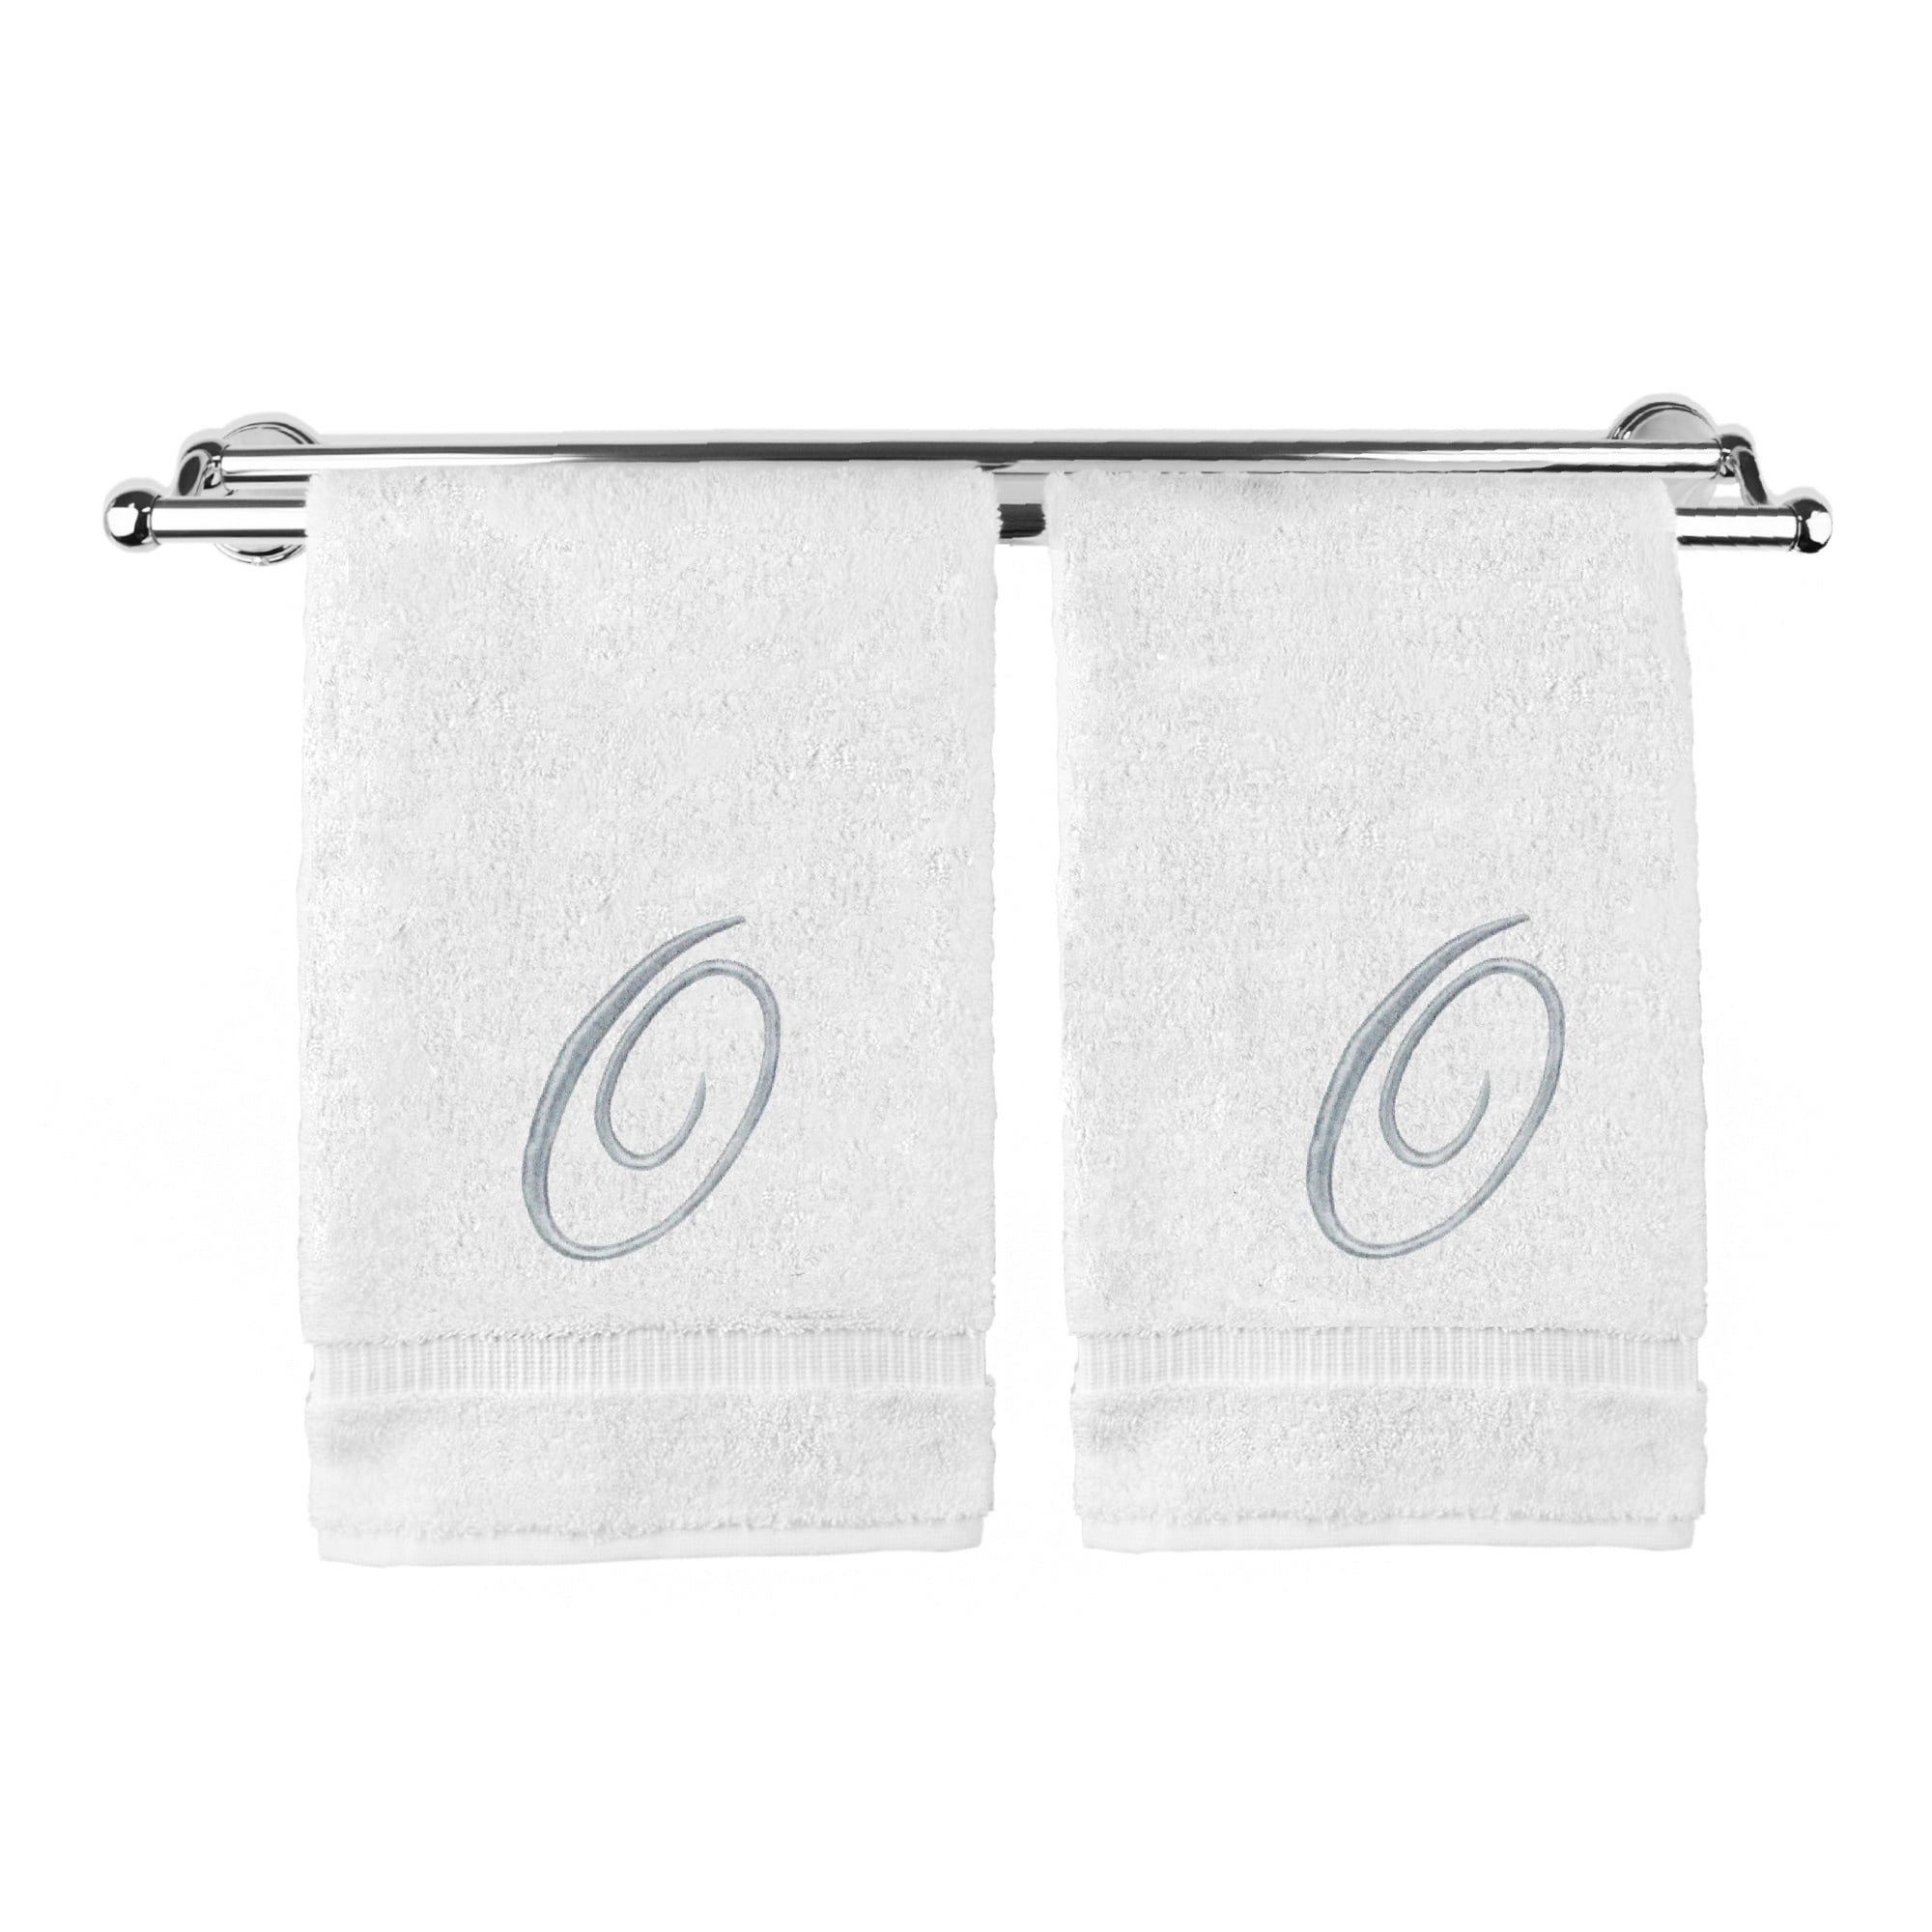 Embroidered Silver Thread Modern Monogram Choose from 100% Turkish Cotton or Made in USA Personalized Towels Luxury Spa Quality Monogrammed Hand Towels Set of 2